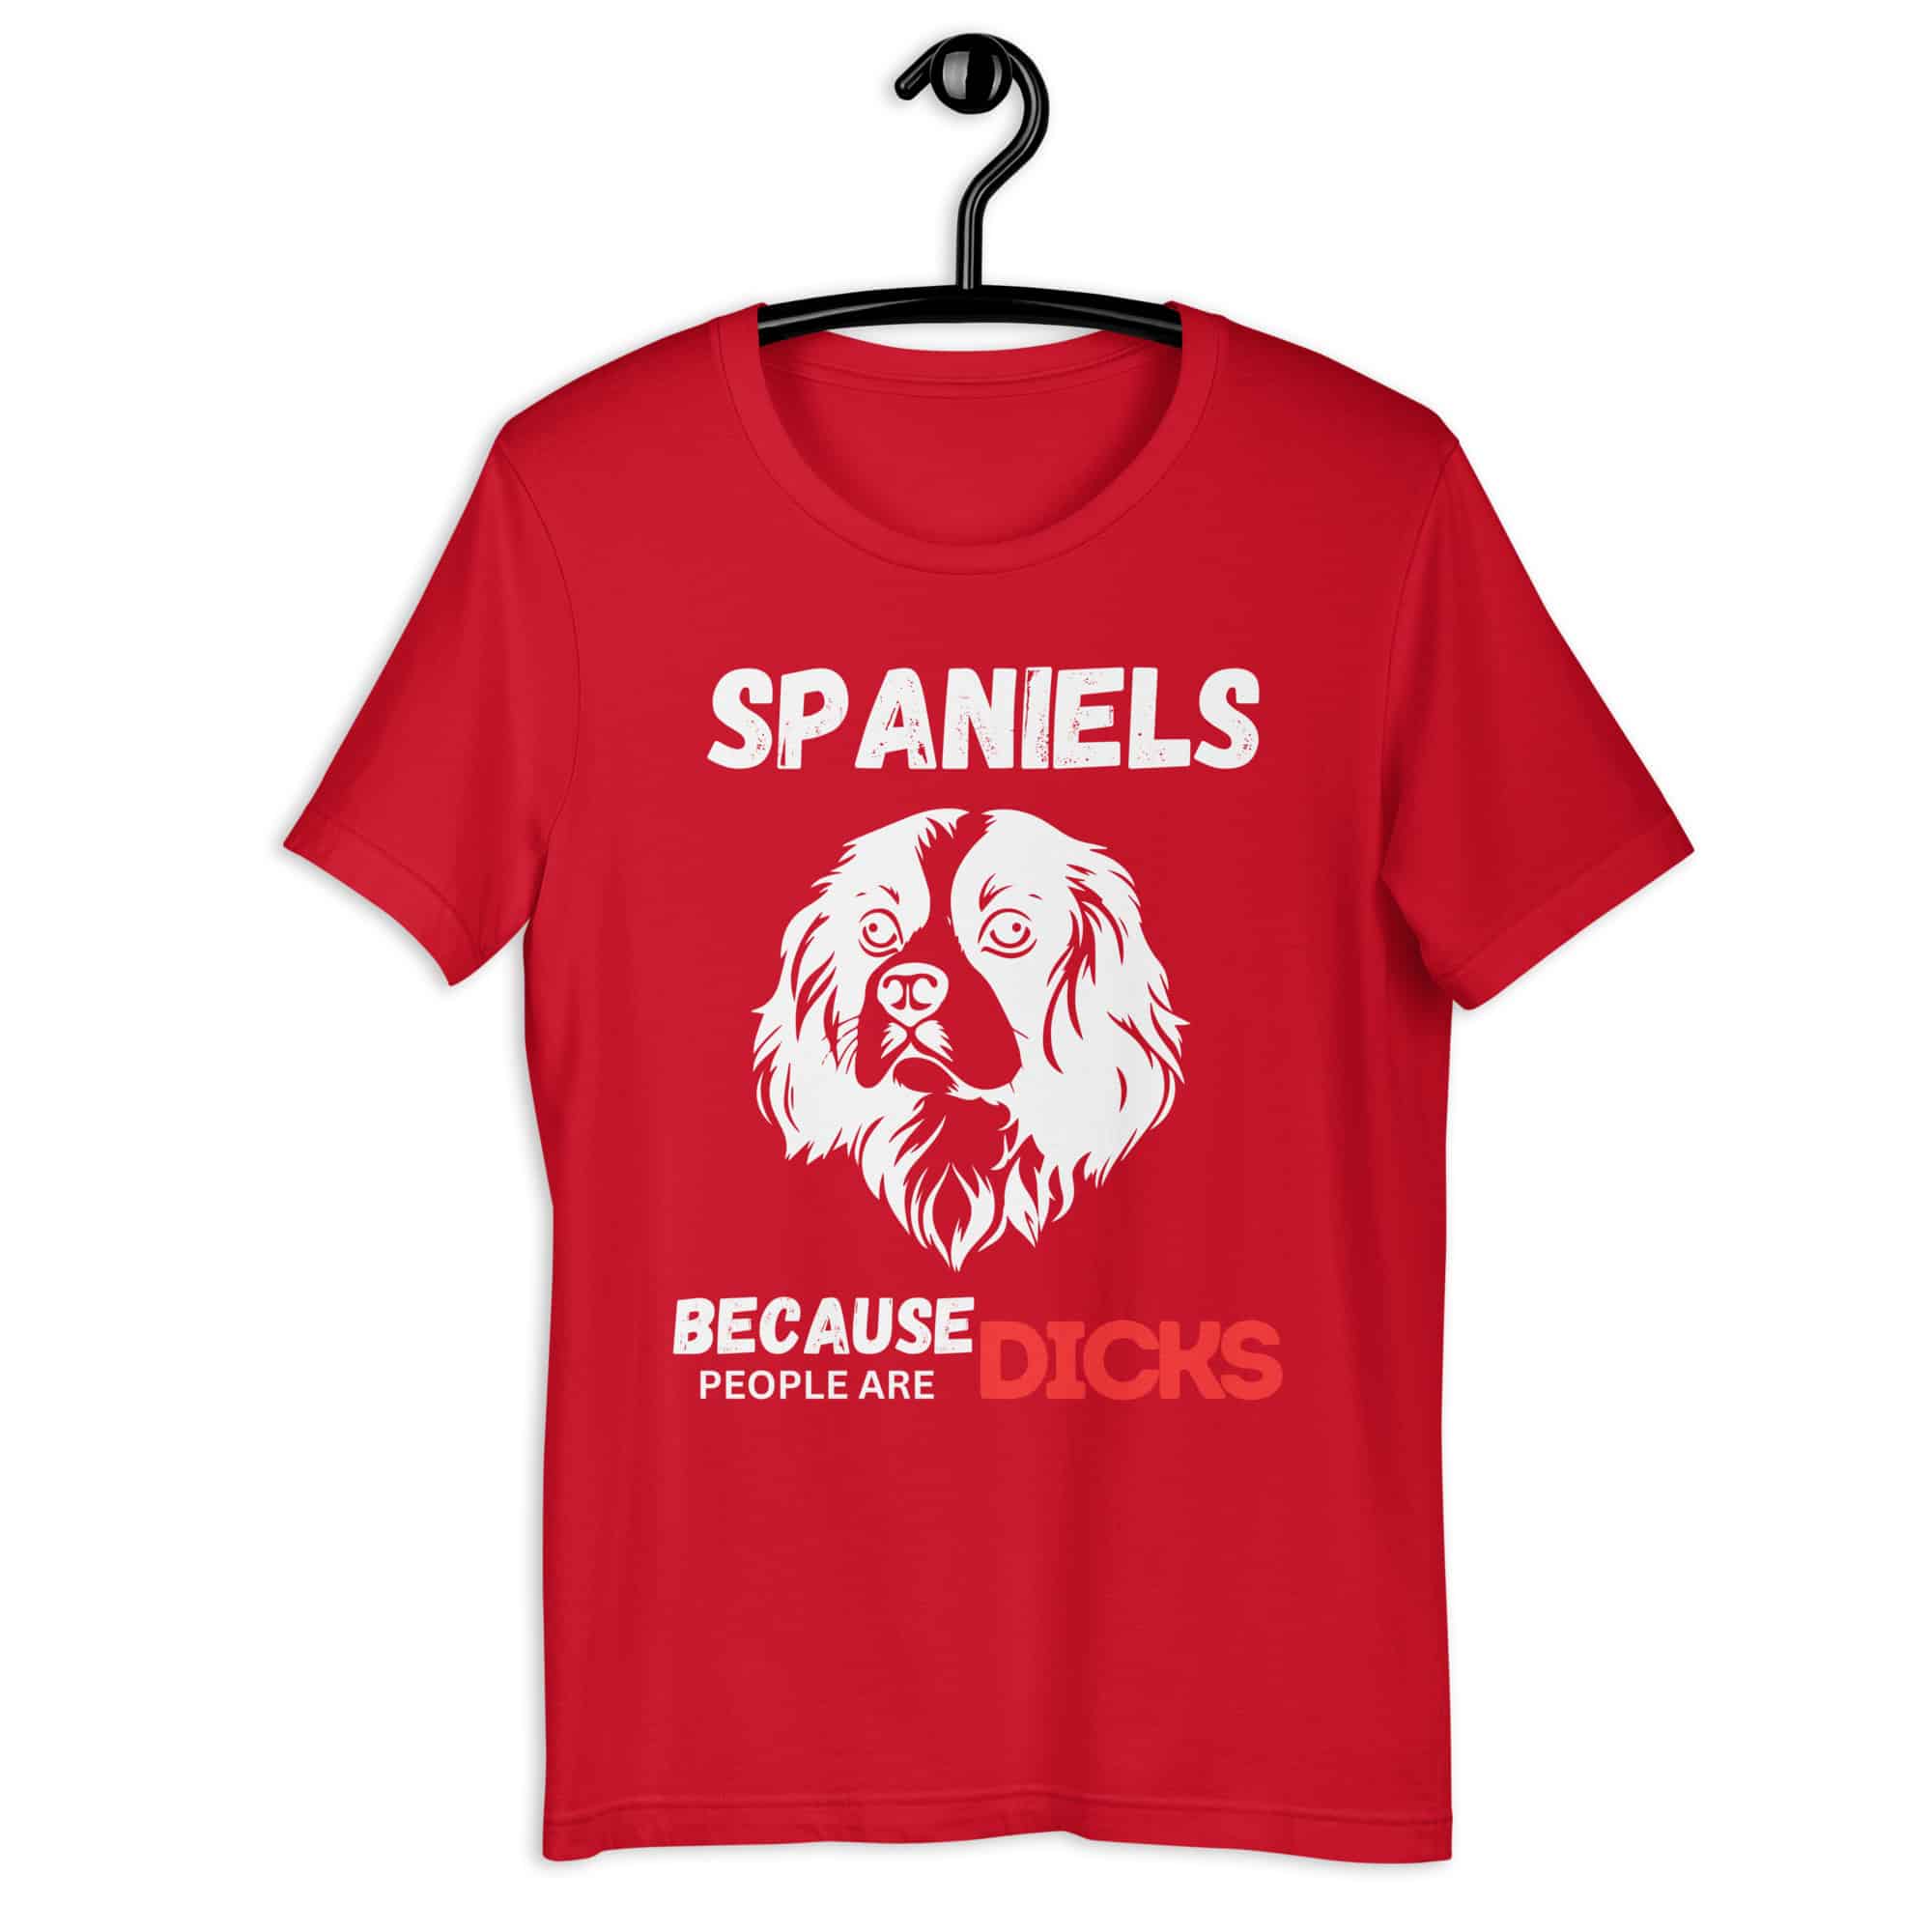 Spaniels Because People Are Dicks Unisex T-Shirt Red